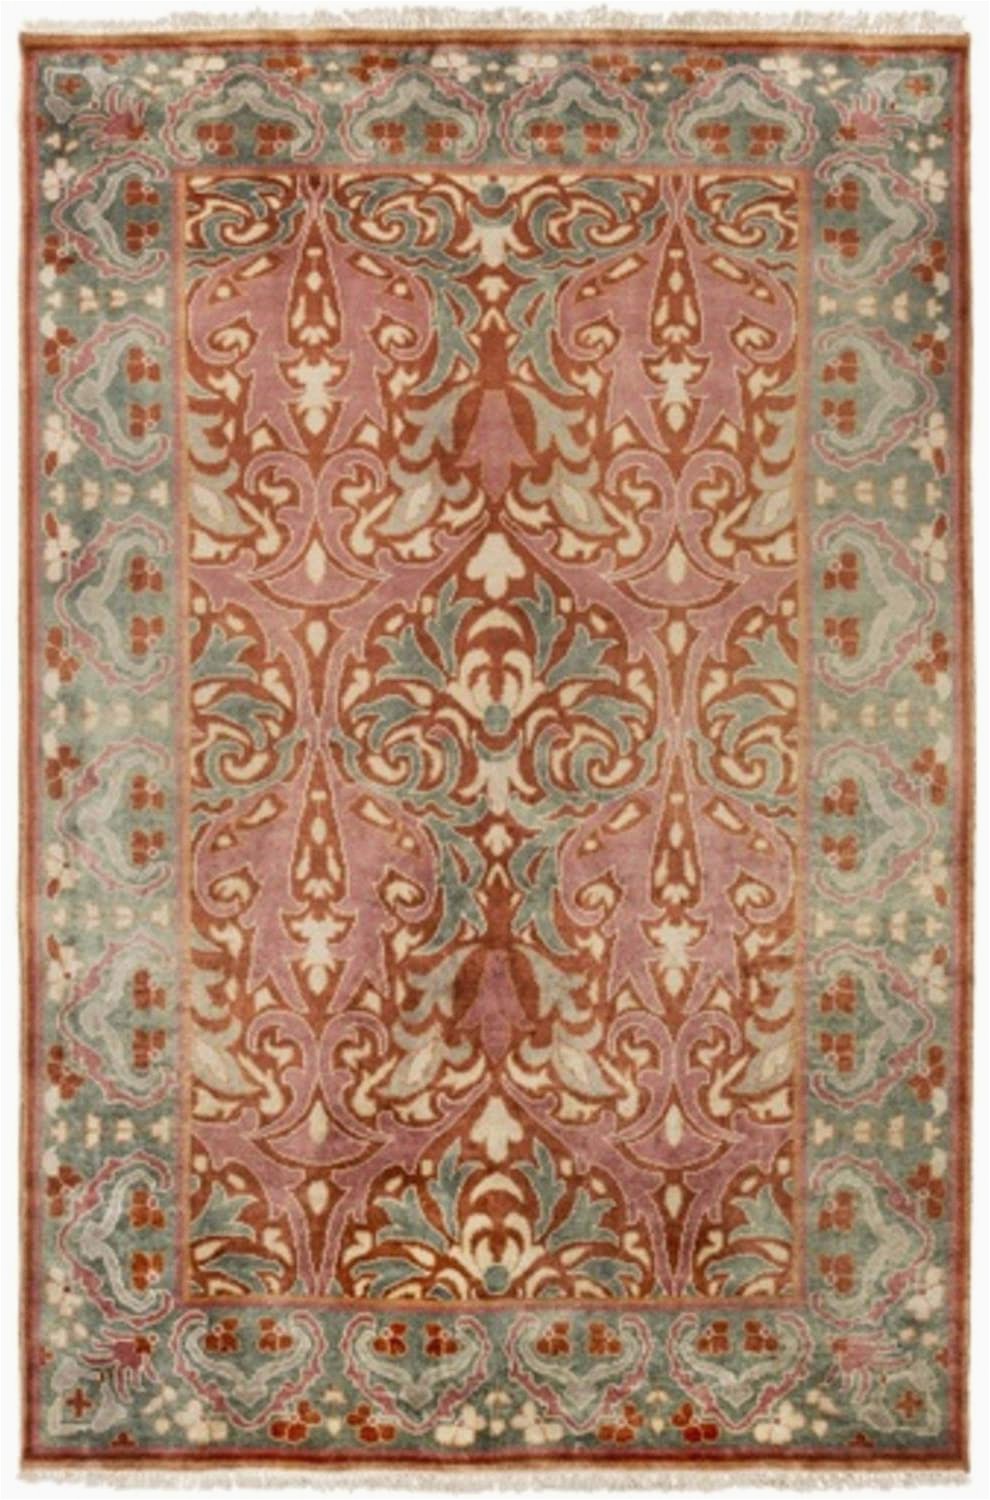 Diva at Home area Rugs Diva at Home 2 X 3 Ambrosia Nectar Pink Sherbert Burnt